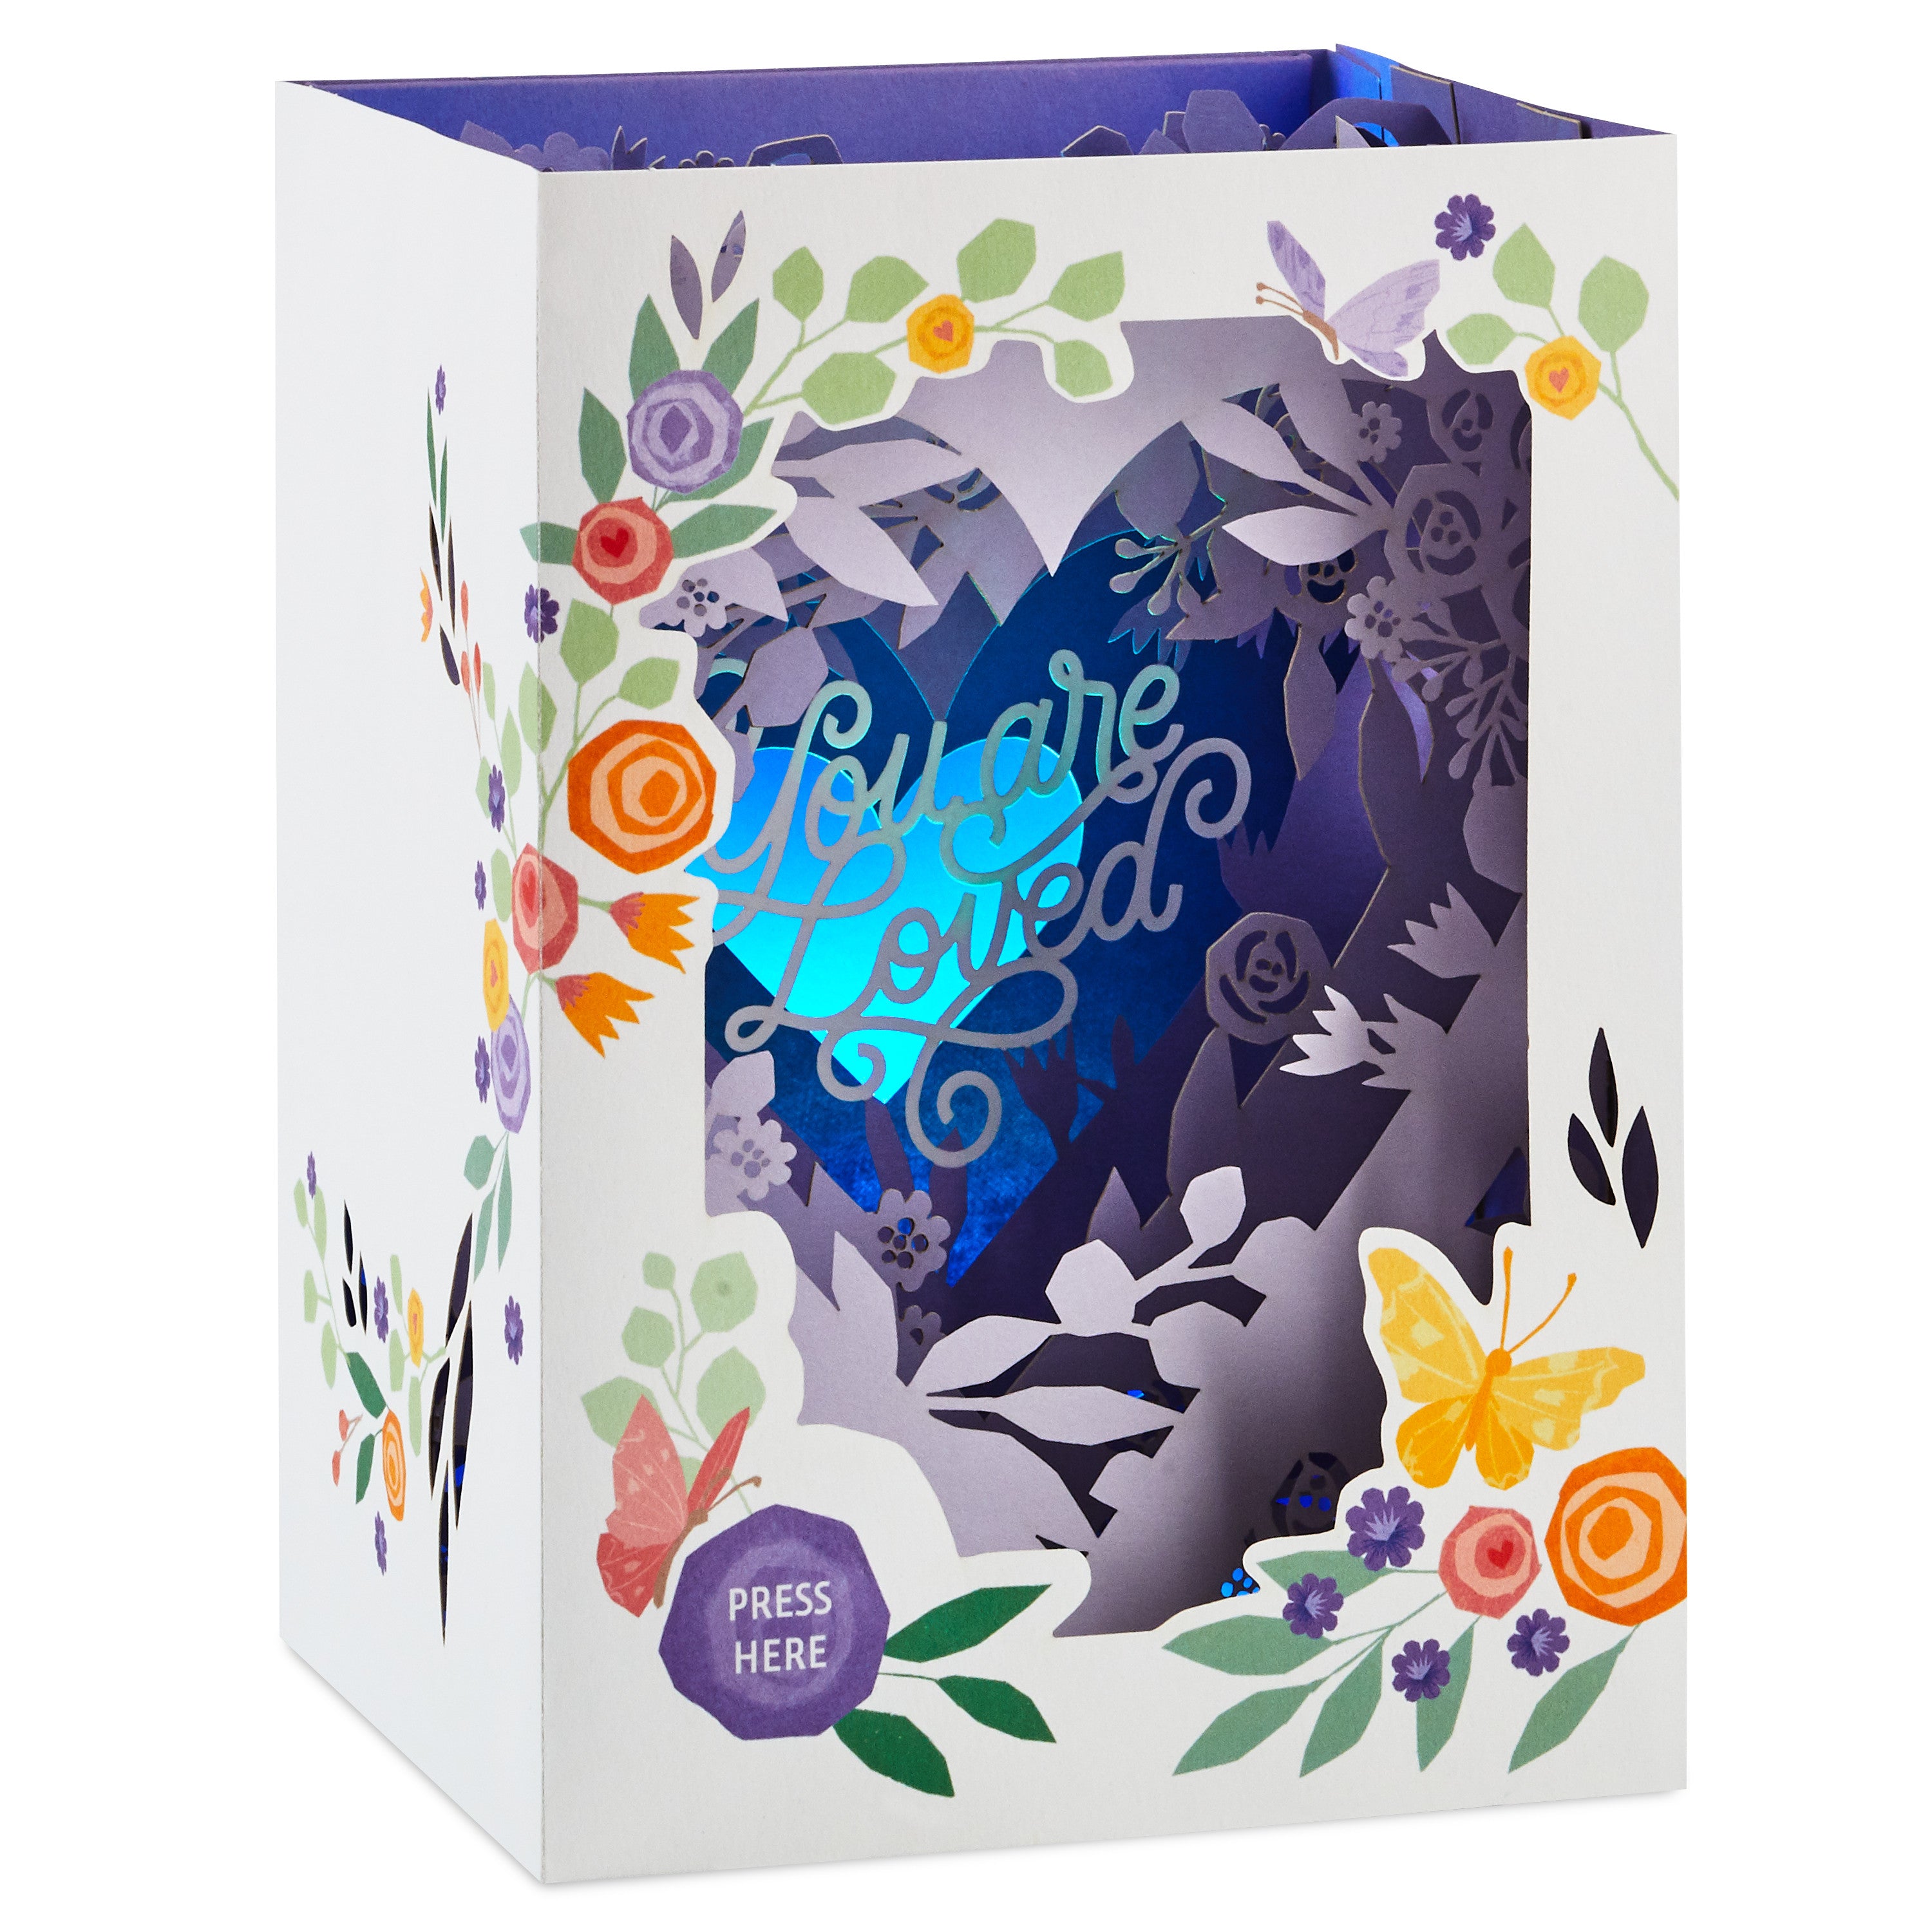 Paper Wonder Musical Pop Up Mothers Day Card (You Are Loved)